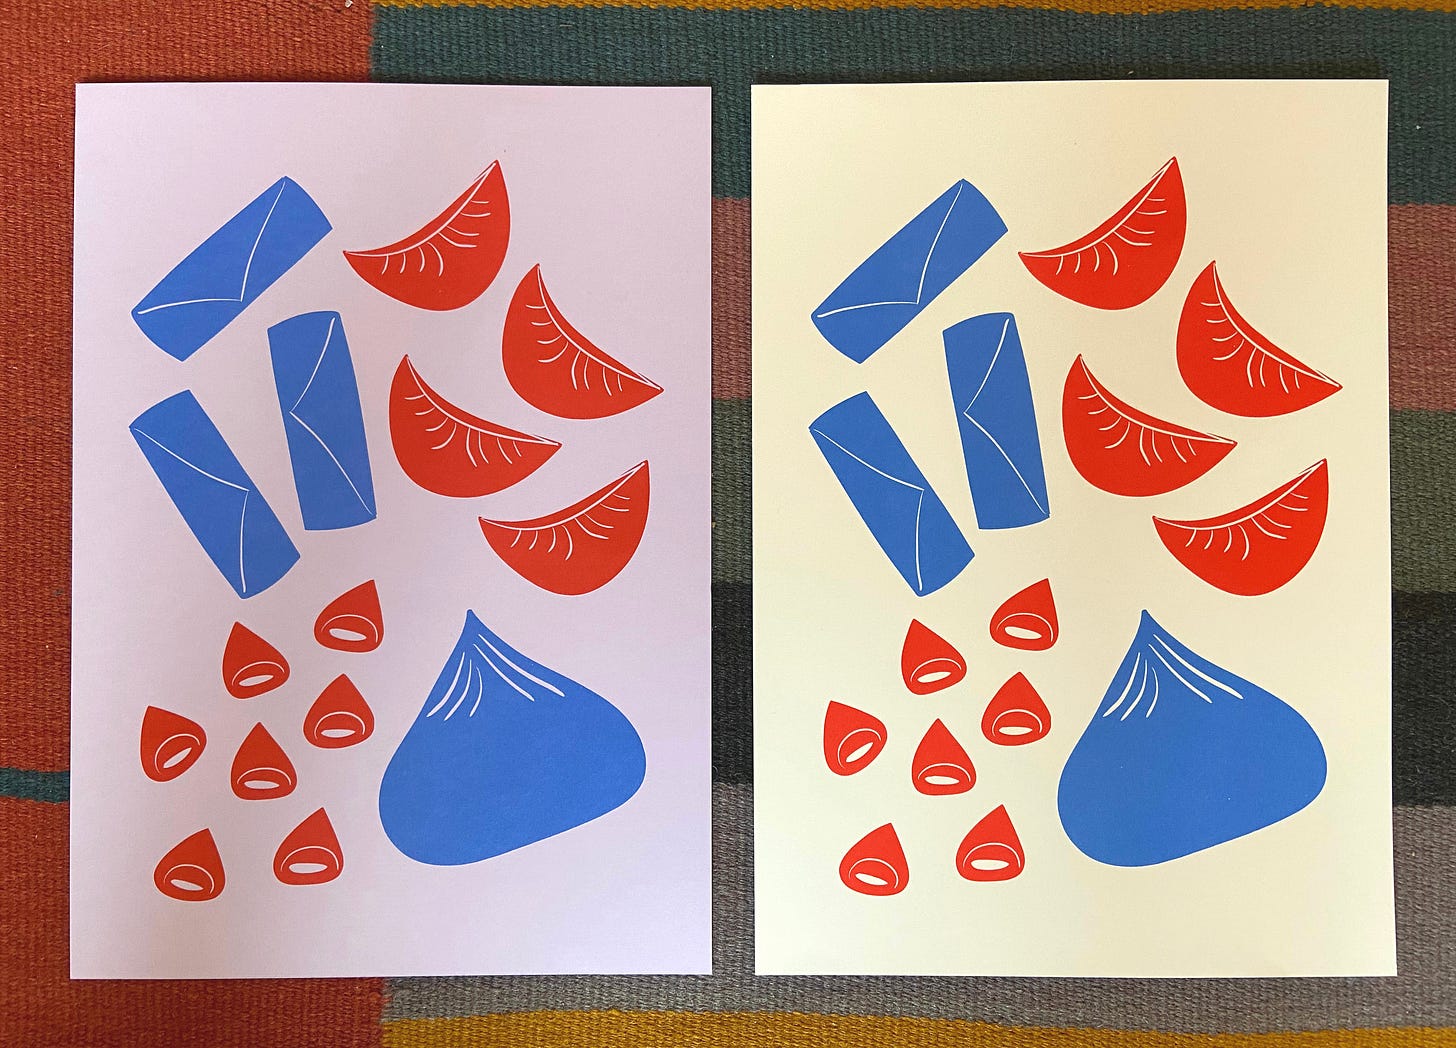 Two riso prints featuring blue and red dumplings, one on lilac paper and one on cream paper